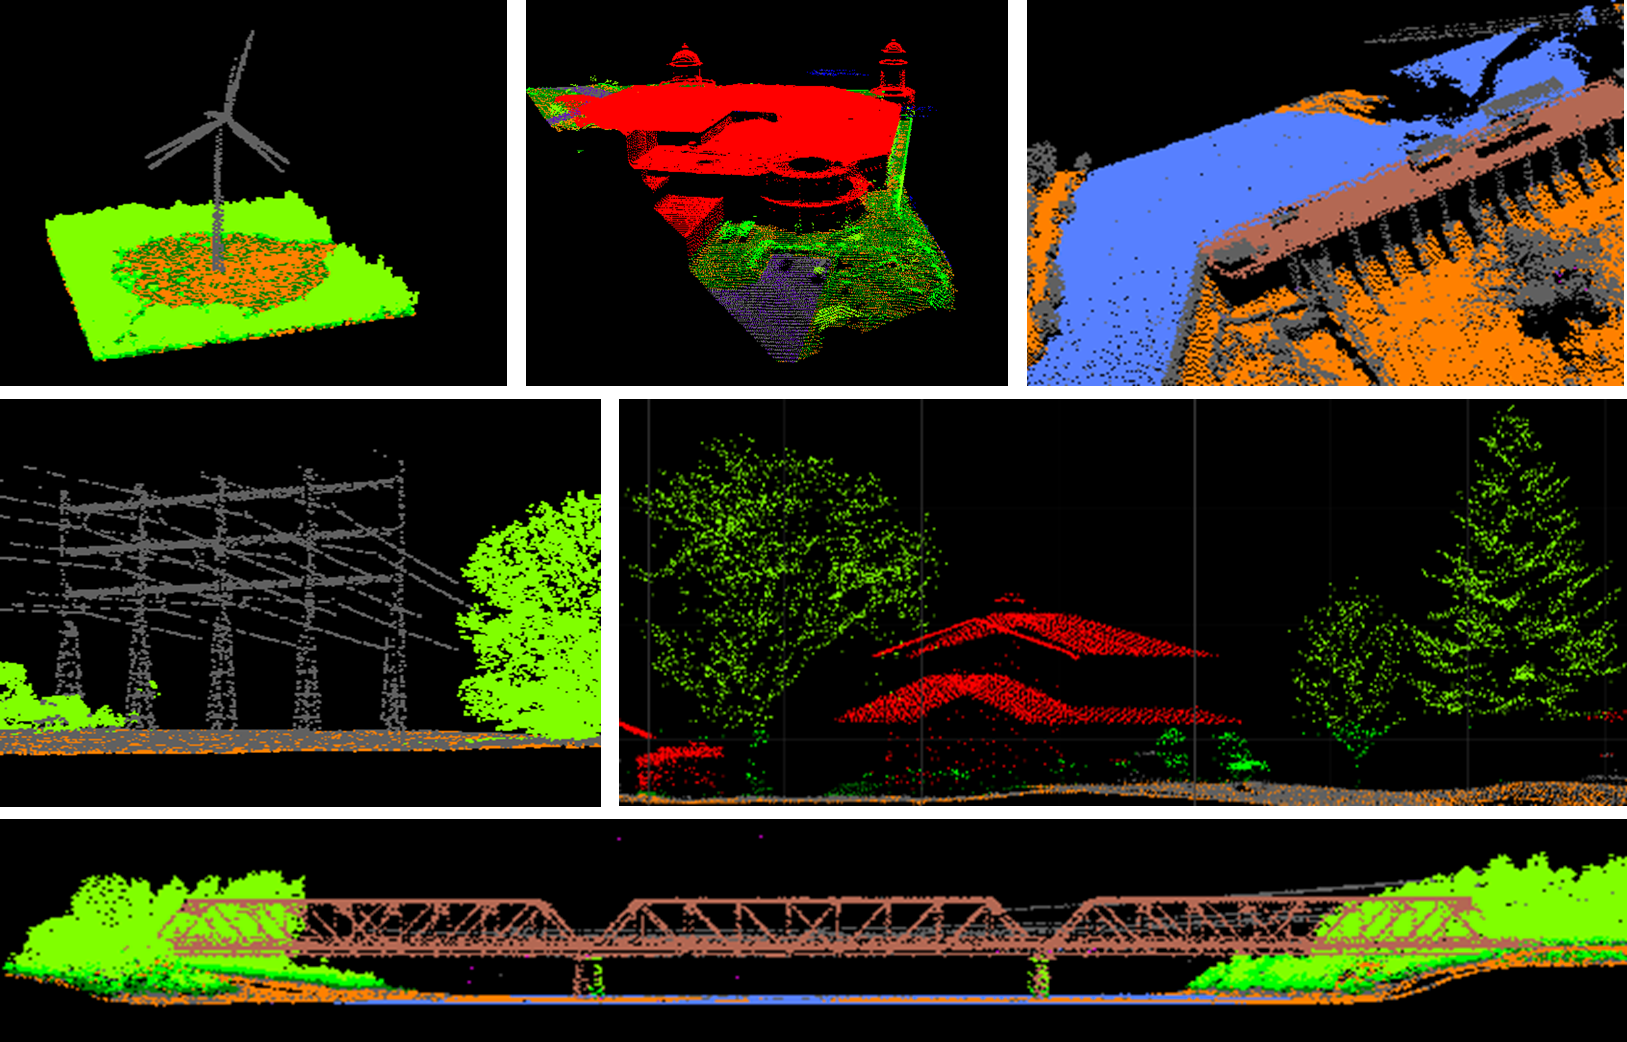 3D images of various features, including a wind turbine, a house, power lines, and a bridge.